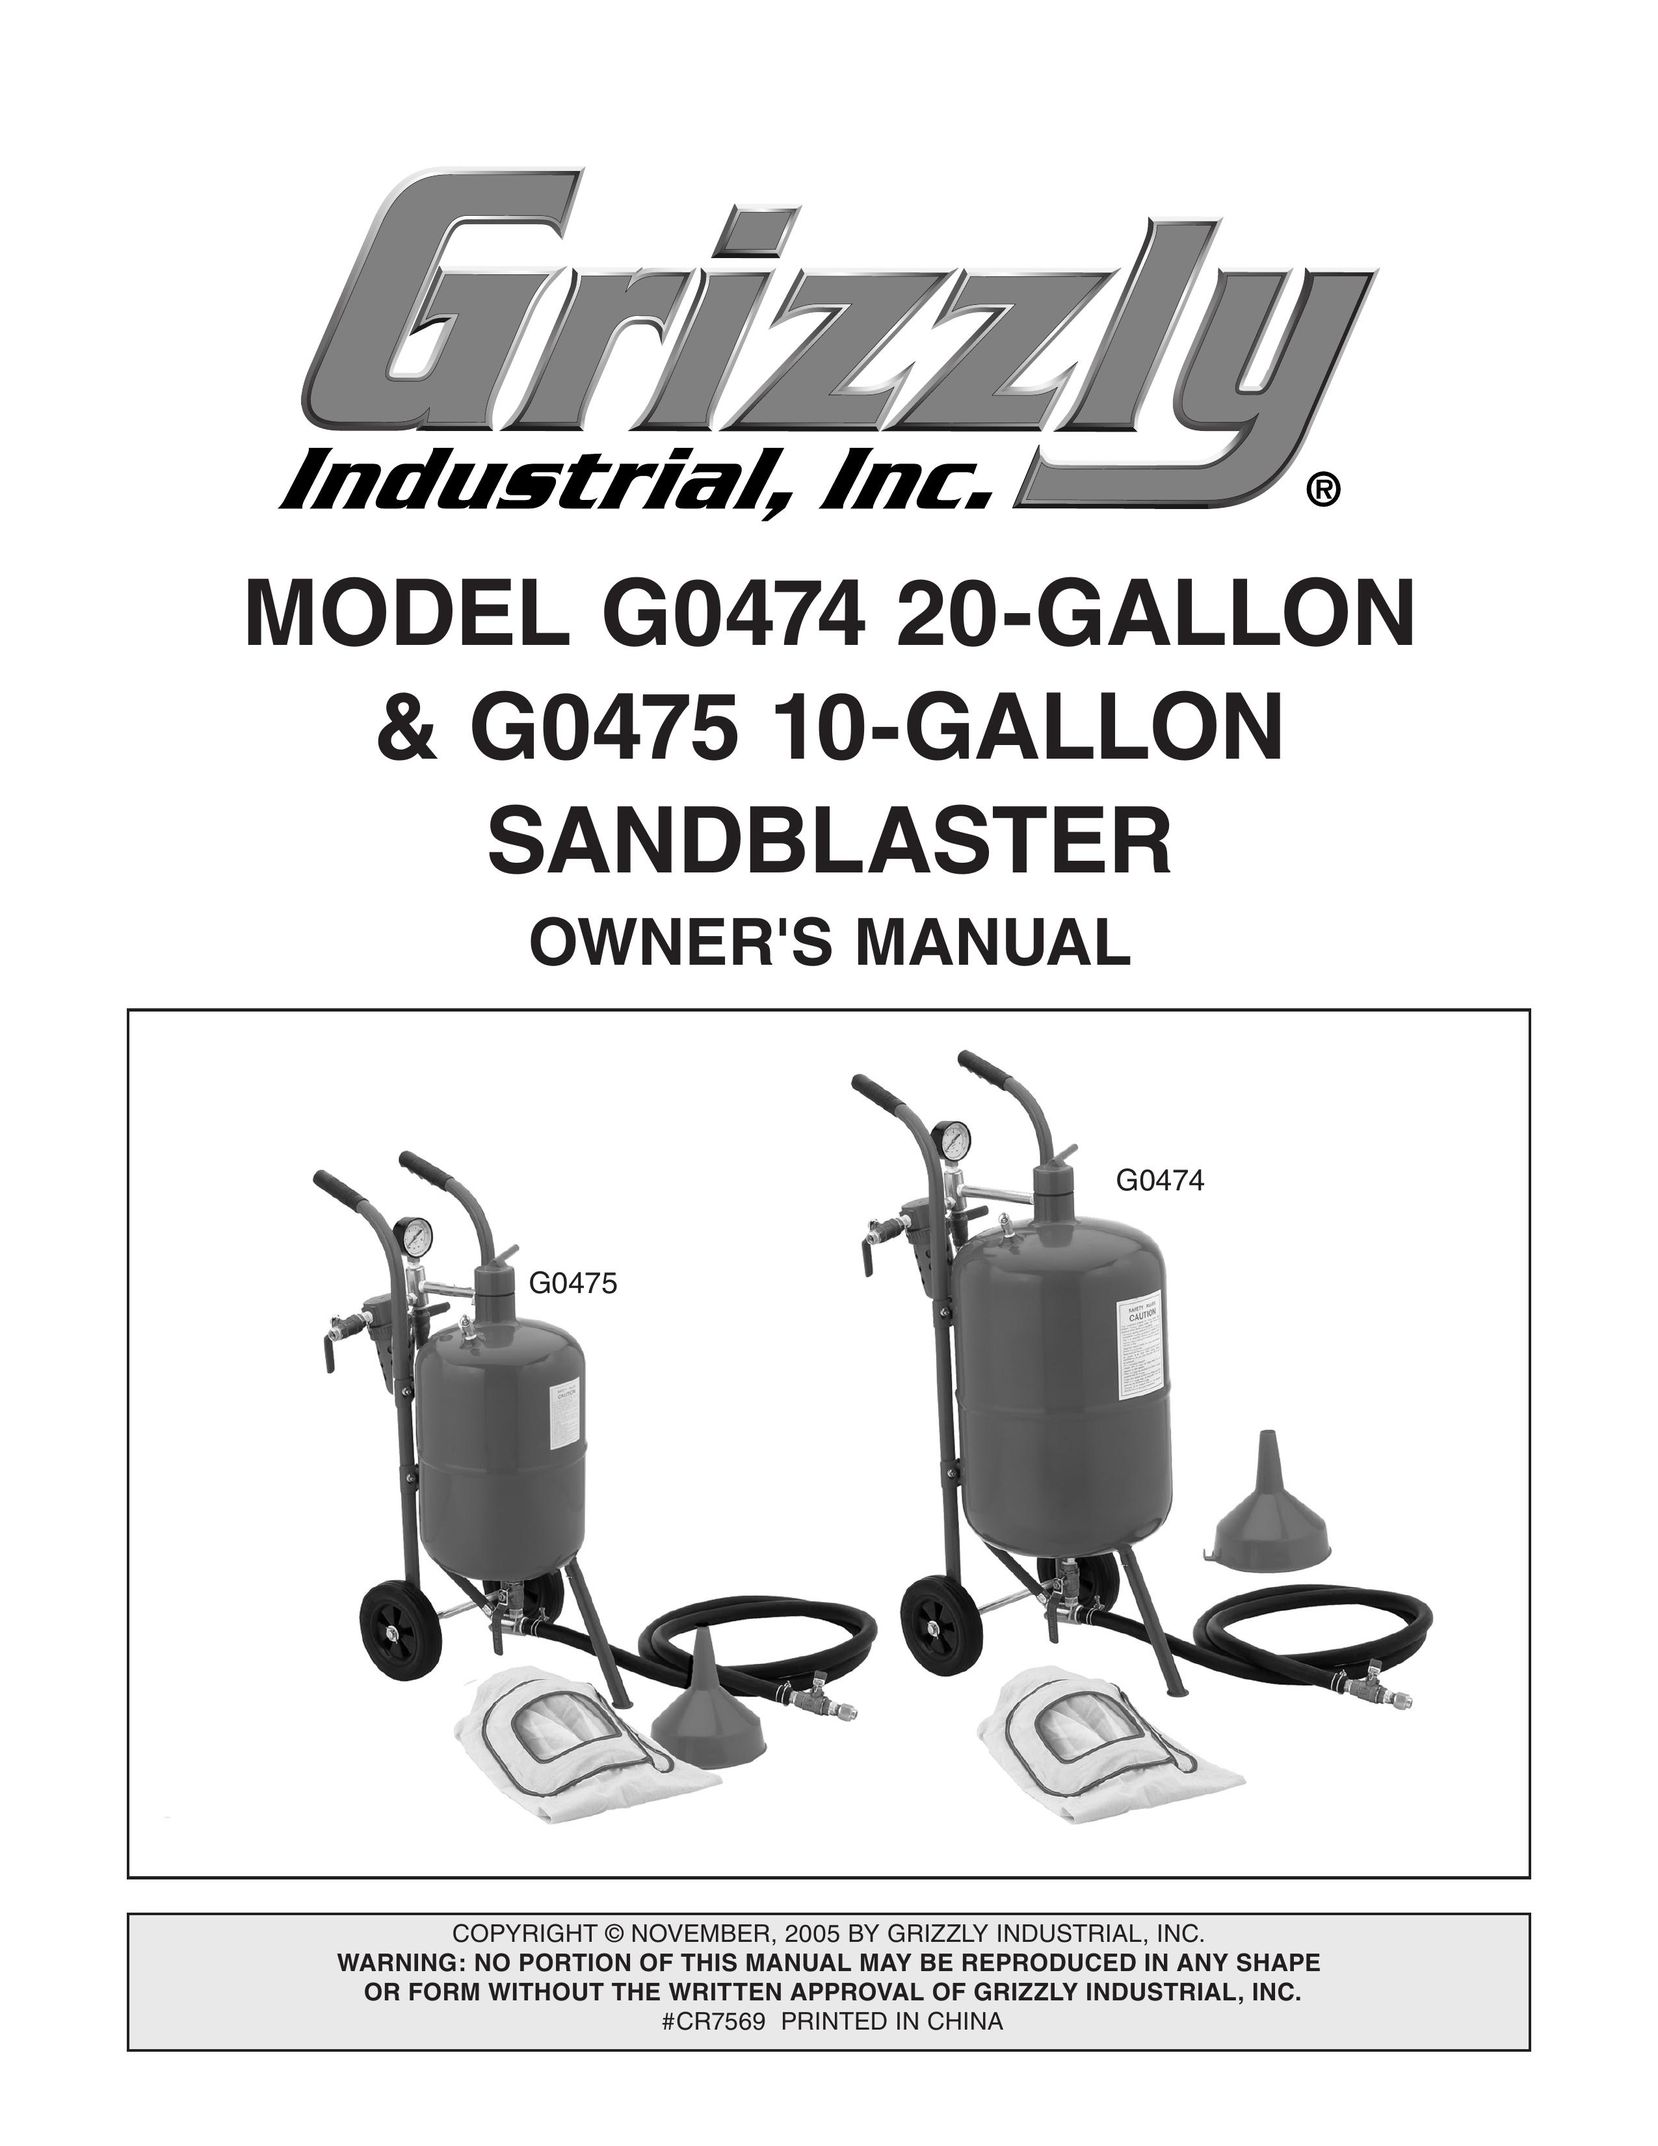 Grizzly G0474 Sander User Manual